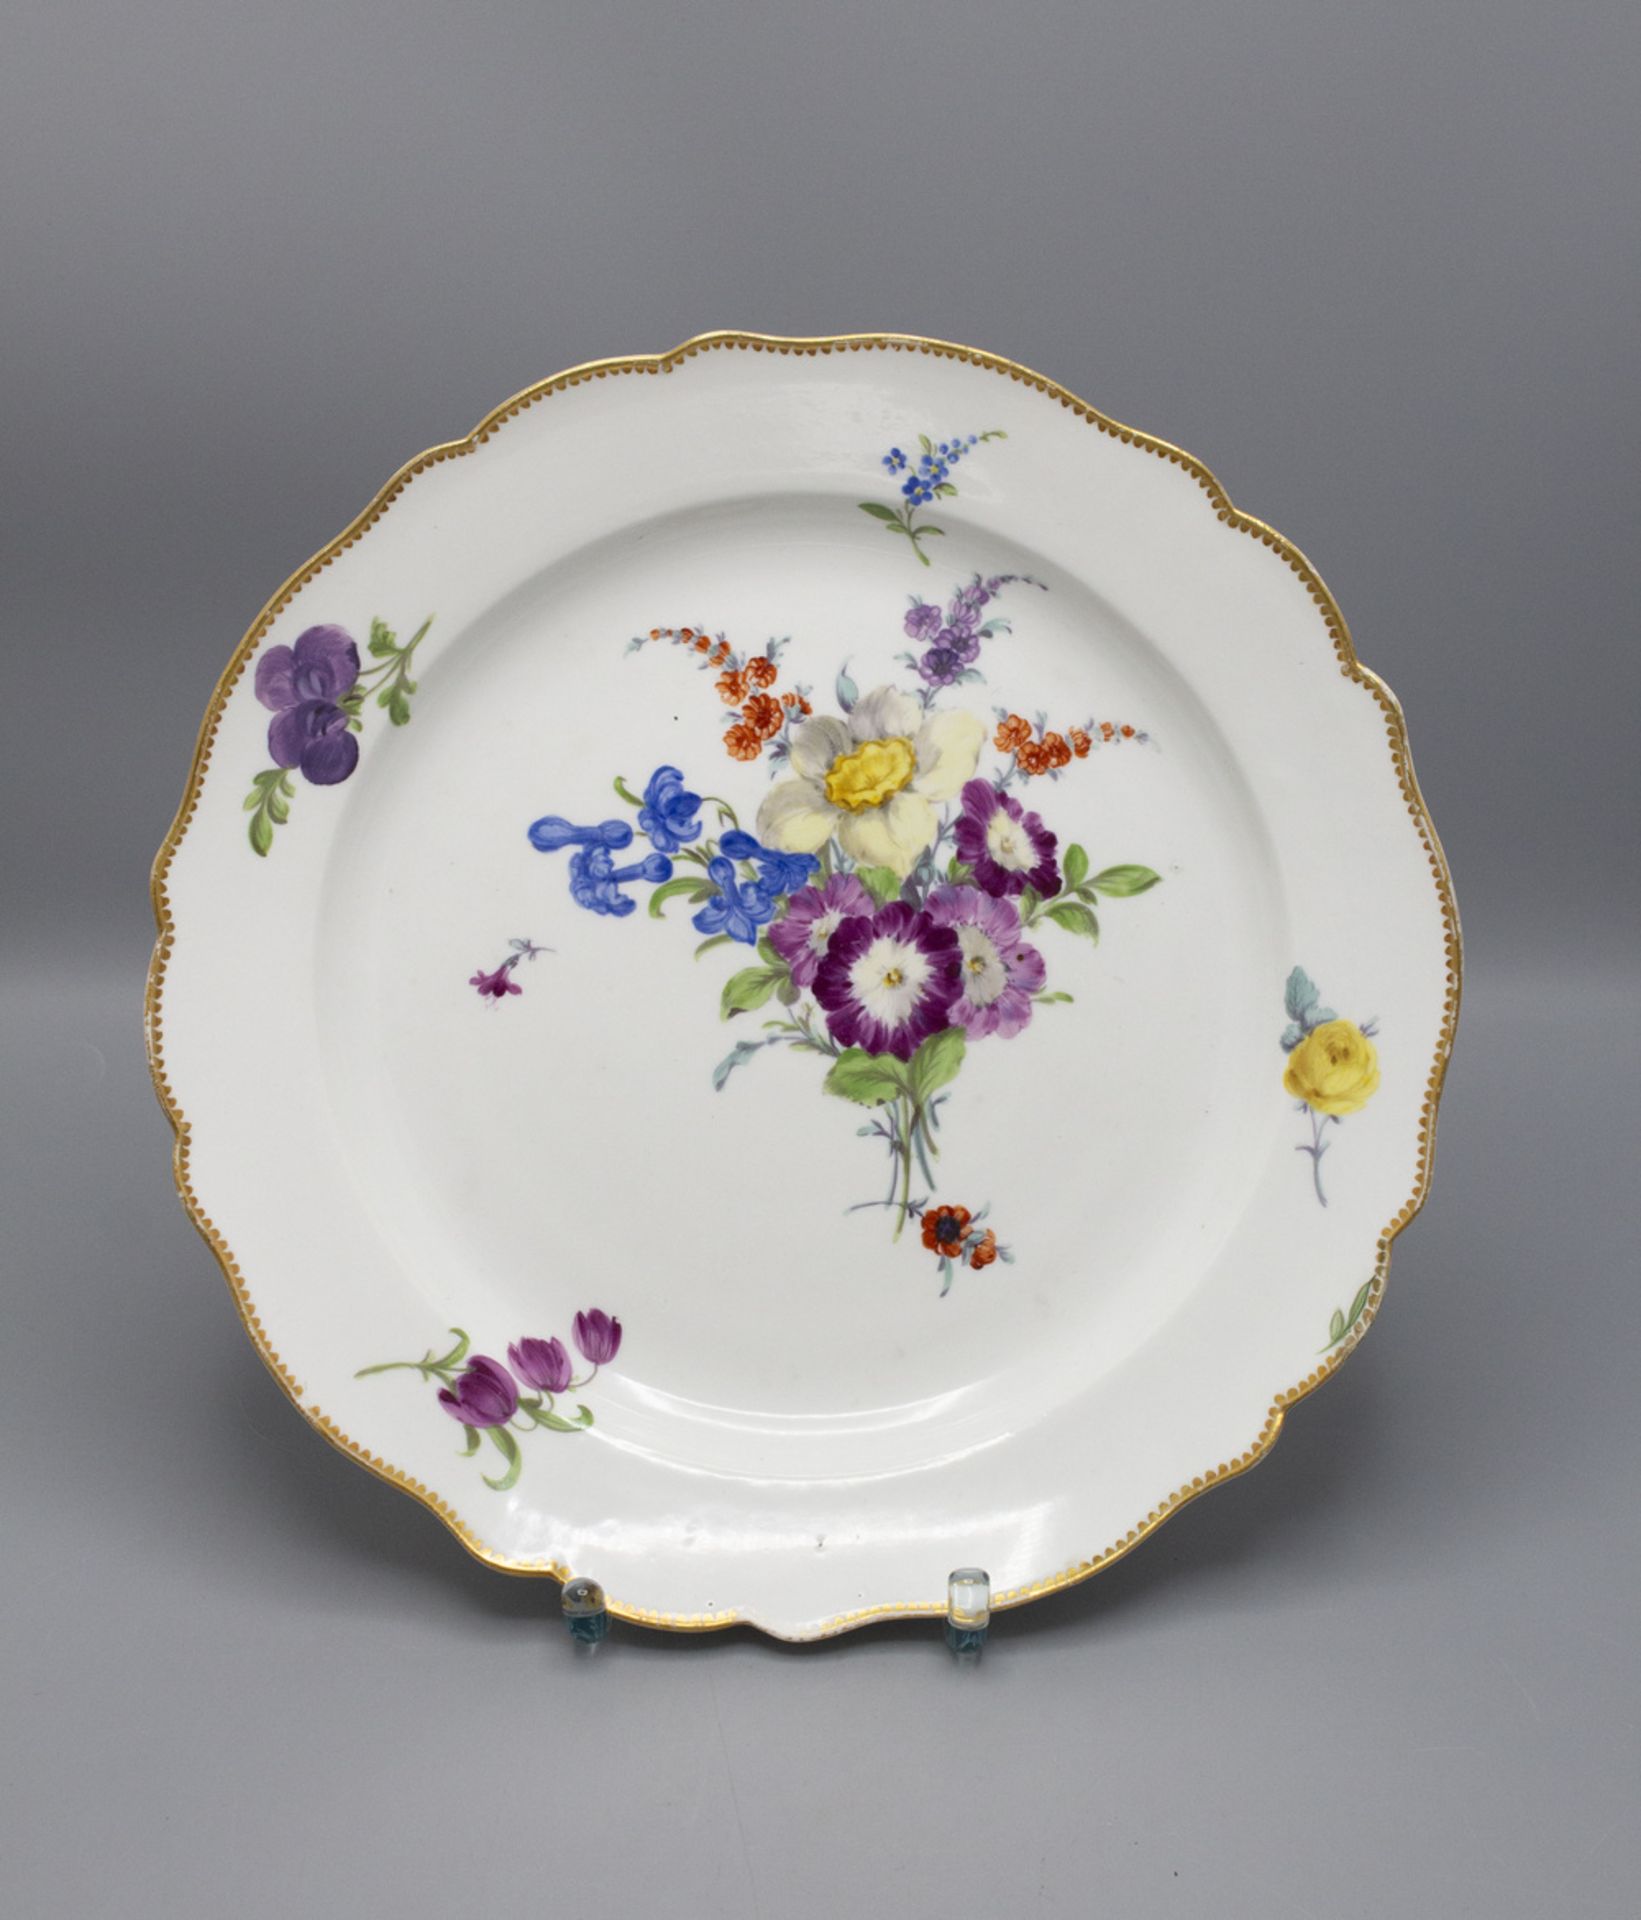 2 große Teller / 2 large plates, Meissen, Marcolini-Periode, 1774-1814 - Image 4 of 6